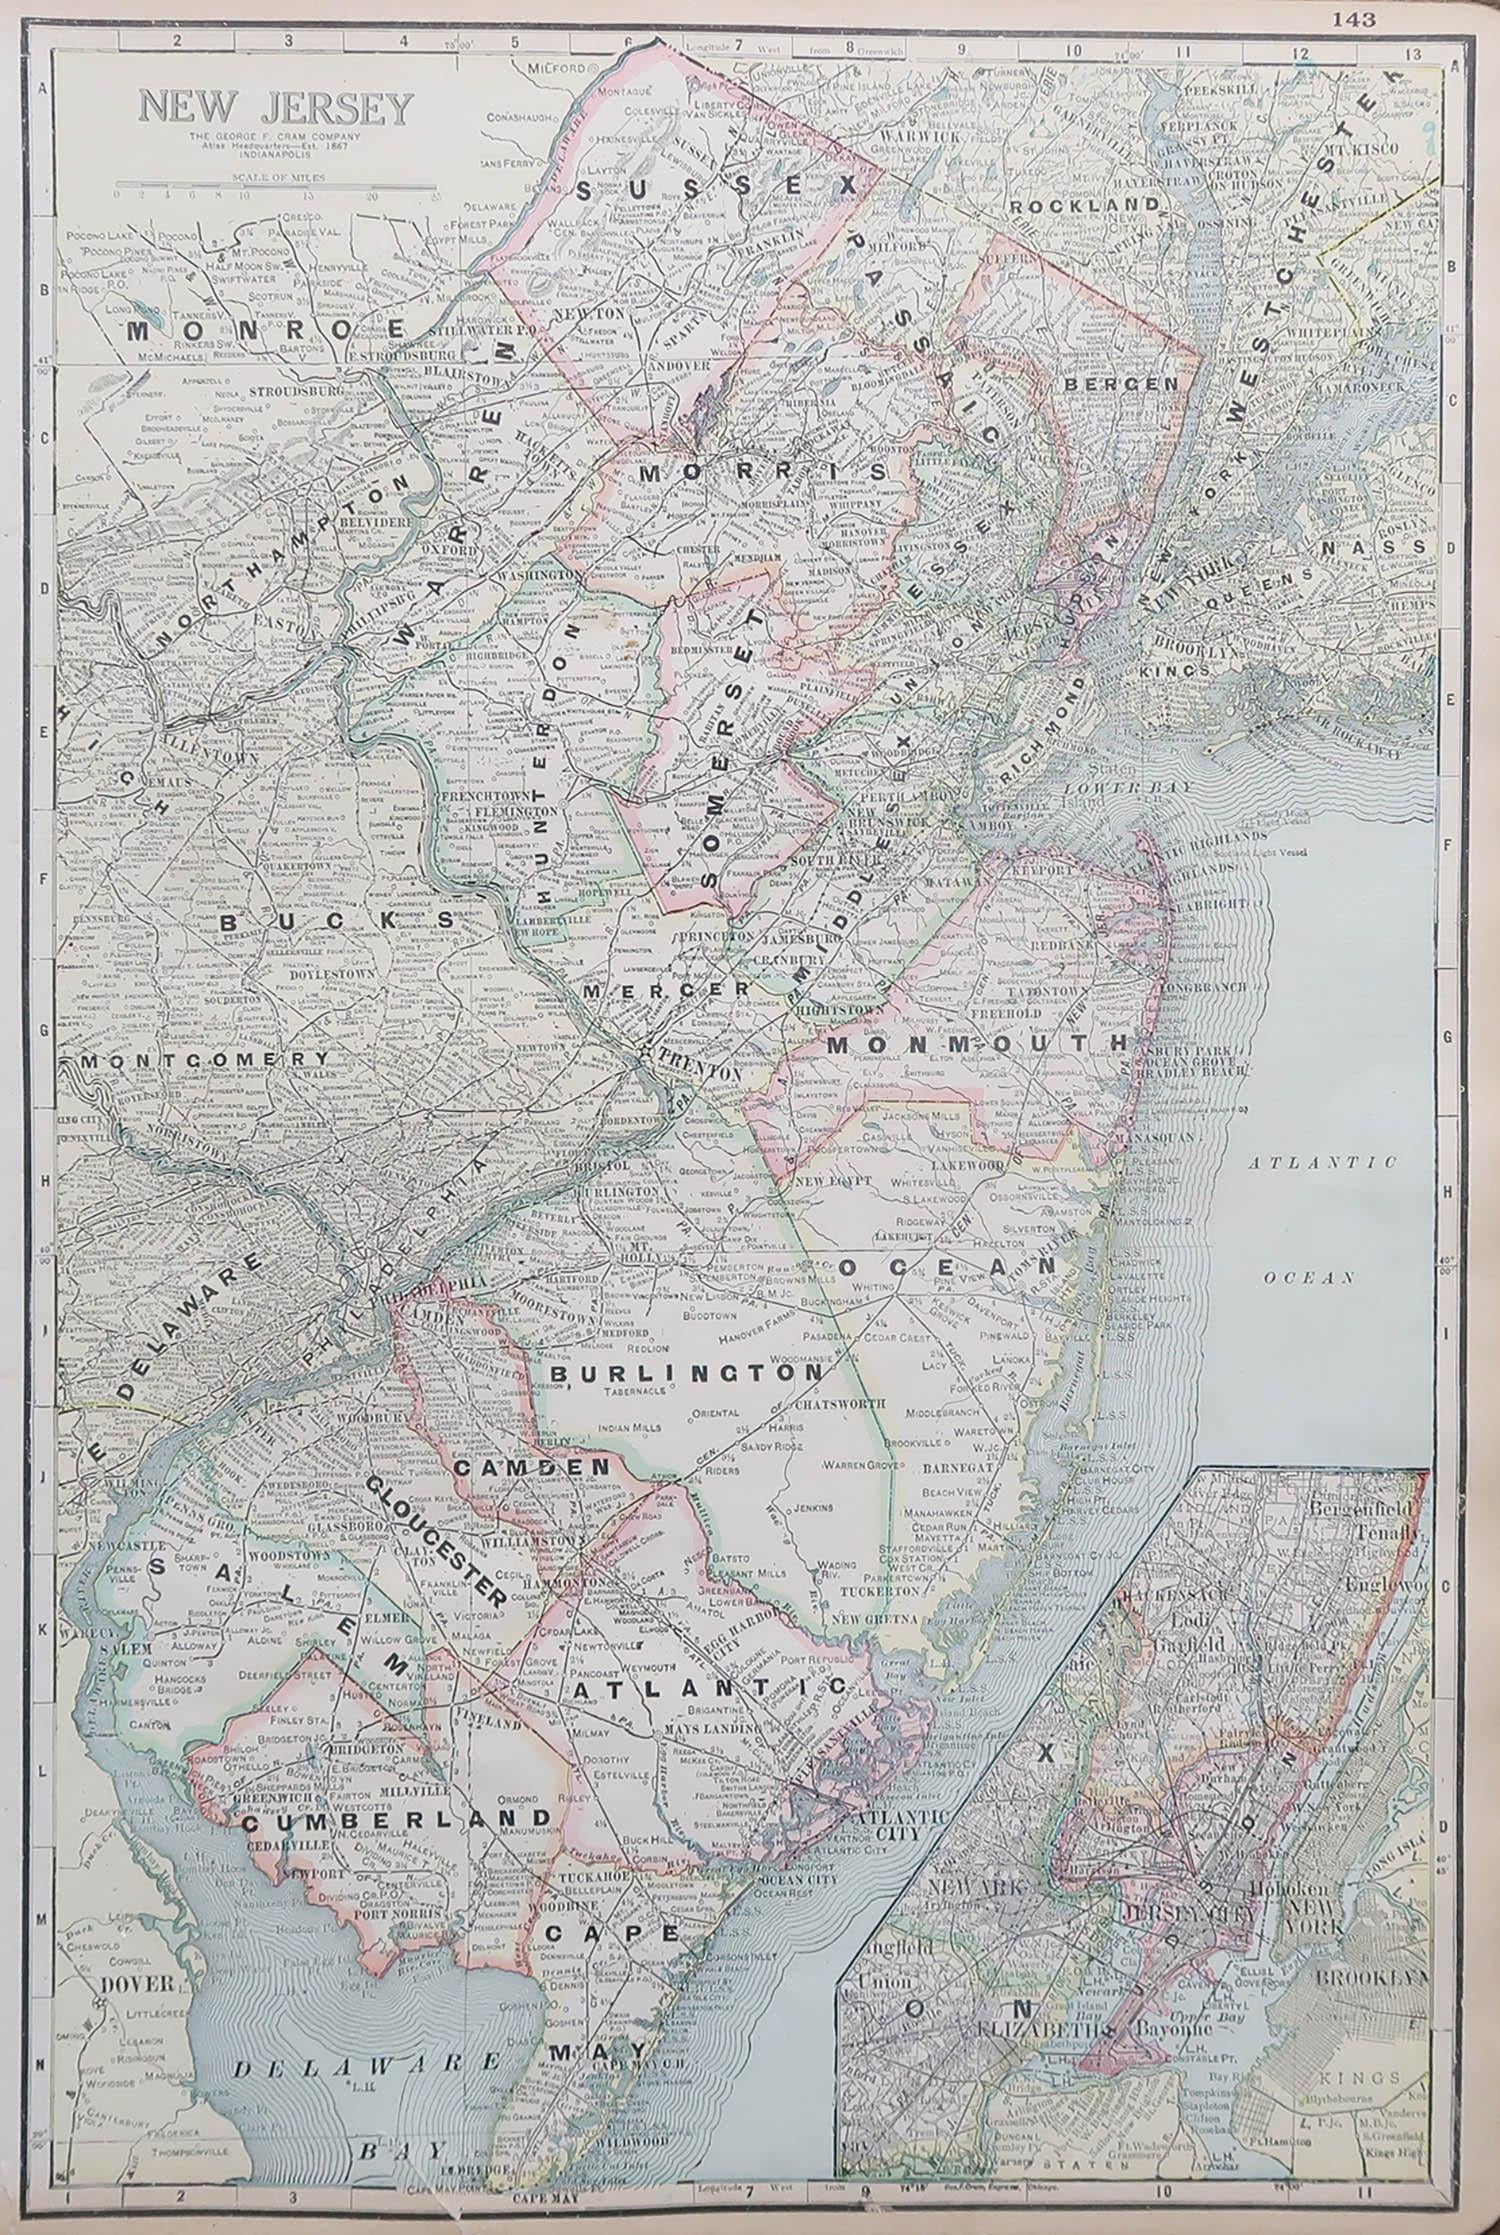 Fabulous map of New Jersey

Original color

Engraved and printed by the George F. Cram Company, Indianapolis.

Published, circa 1900

Unframed

Repairs to minor edge tears

 